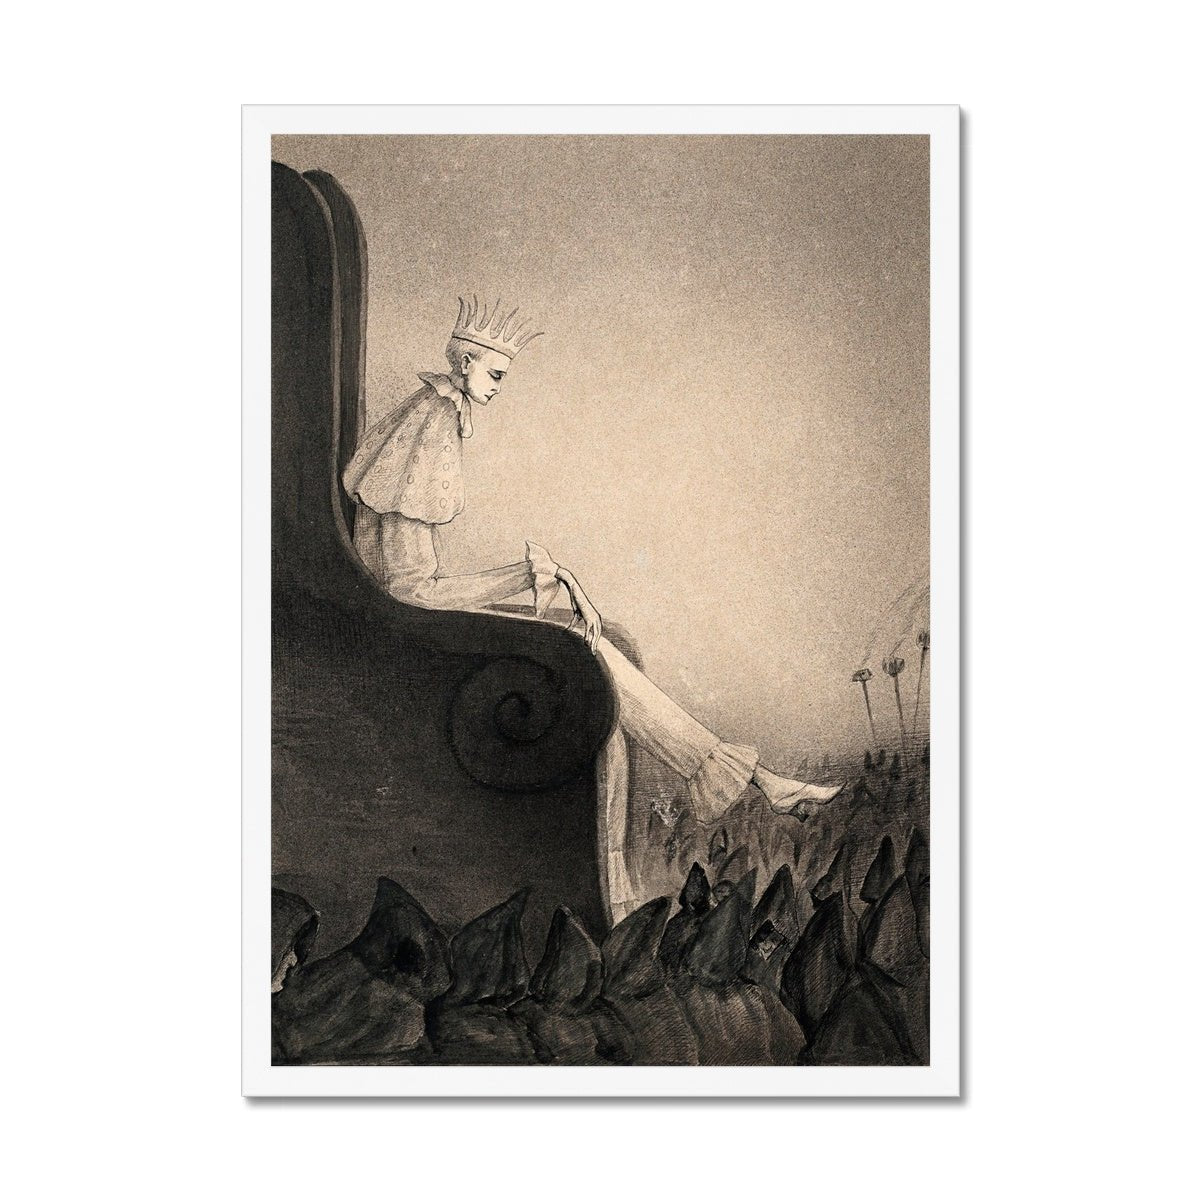 Framed Print 6"x8" / White Frame Alfred Kubin: The Last King, Symbolist (Anti Capitalist) Surreal Wall Art Antique Gothic Decor Dark Wiccan Pagan Occult Framed Art Print